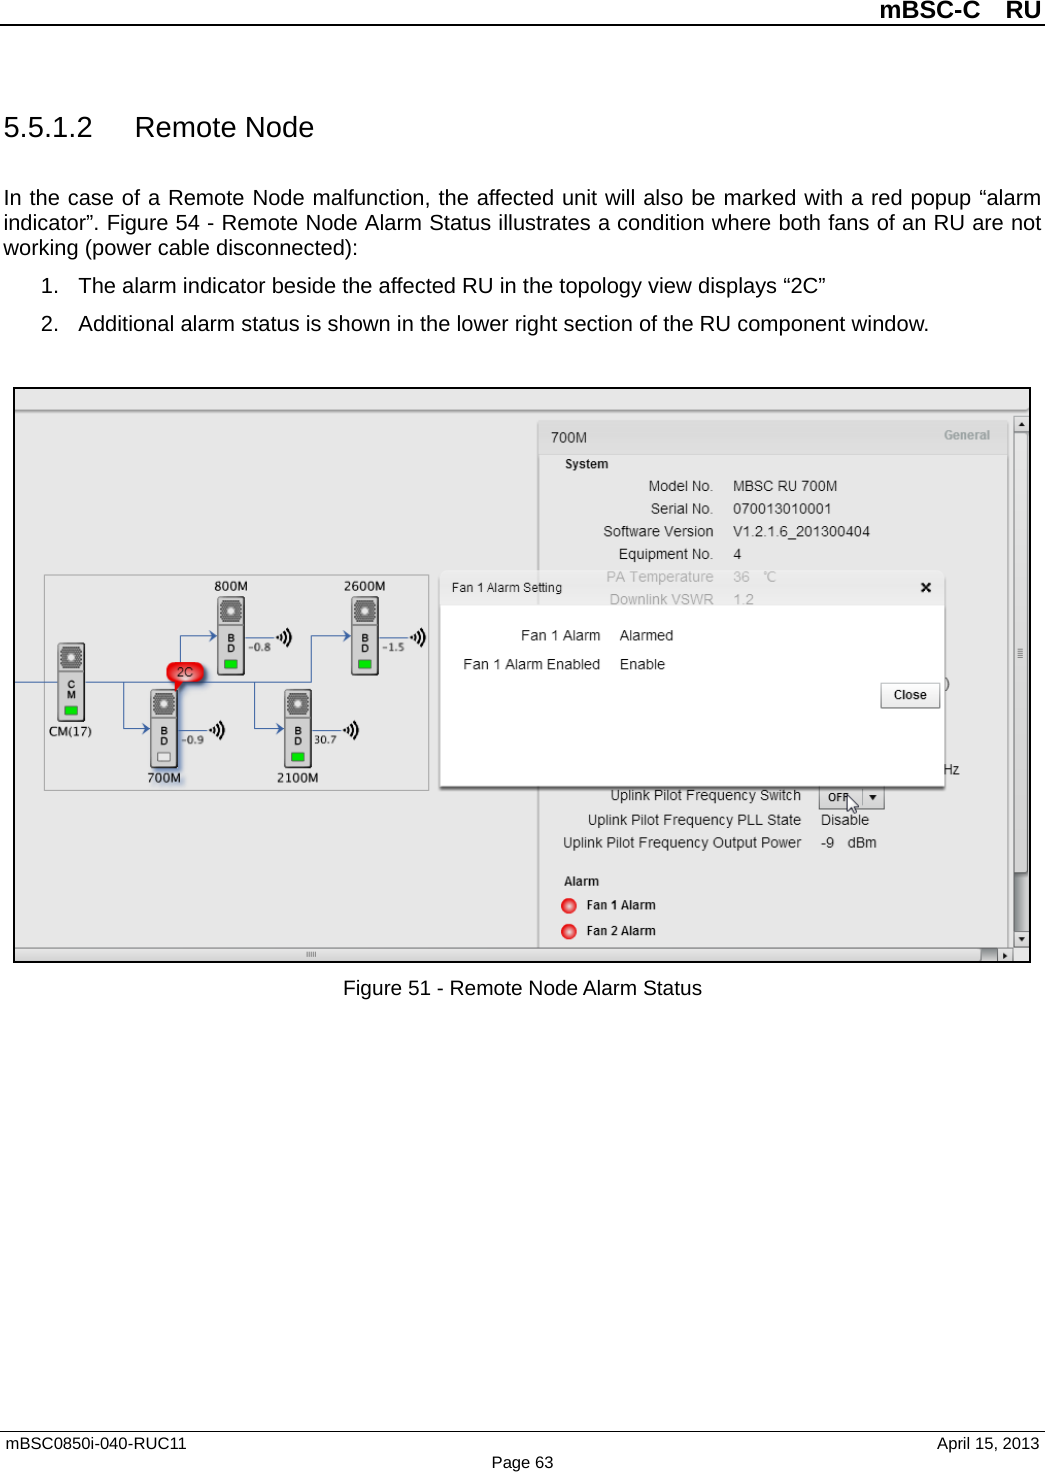          mBSC-C  RU   mBSC0850i-040-RUC11                                April 15, 2013 Page 63 5.5.1.2 Remote Node In the case of a Remote Node malfunction, the affected unit will also be marked with a red popup “alarm indicator”. Figure 54 - Remote Node Alarm Status illustrates a condition where both fans of an RU are not working (power cable disconnected): 1. The alarm indicator beside the affected RU in the topology view displays “2C”   2. Additional alarm status is shown in the lower right section of the RU component window.     Figure 51 - Remote Node Alarm Status    